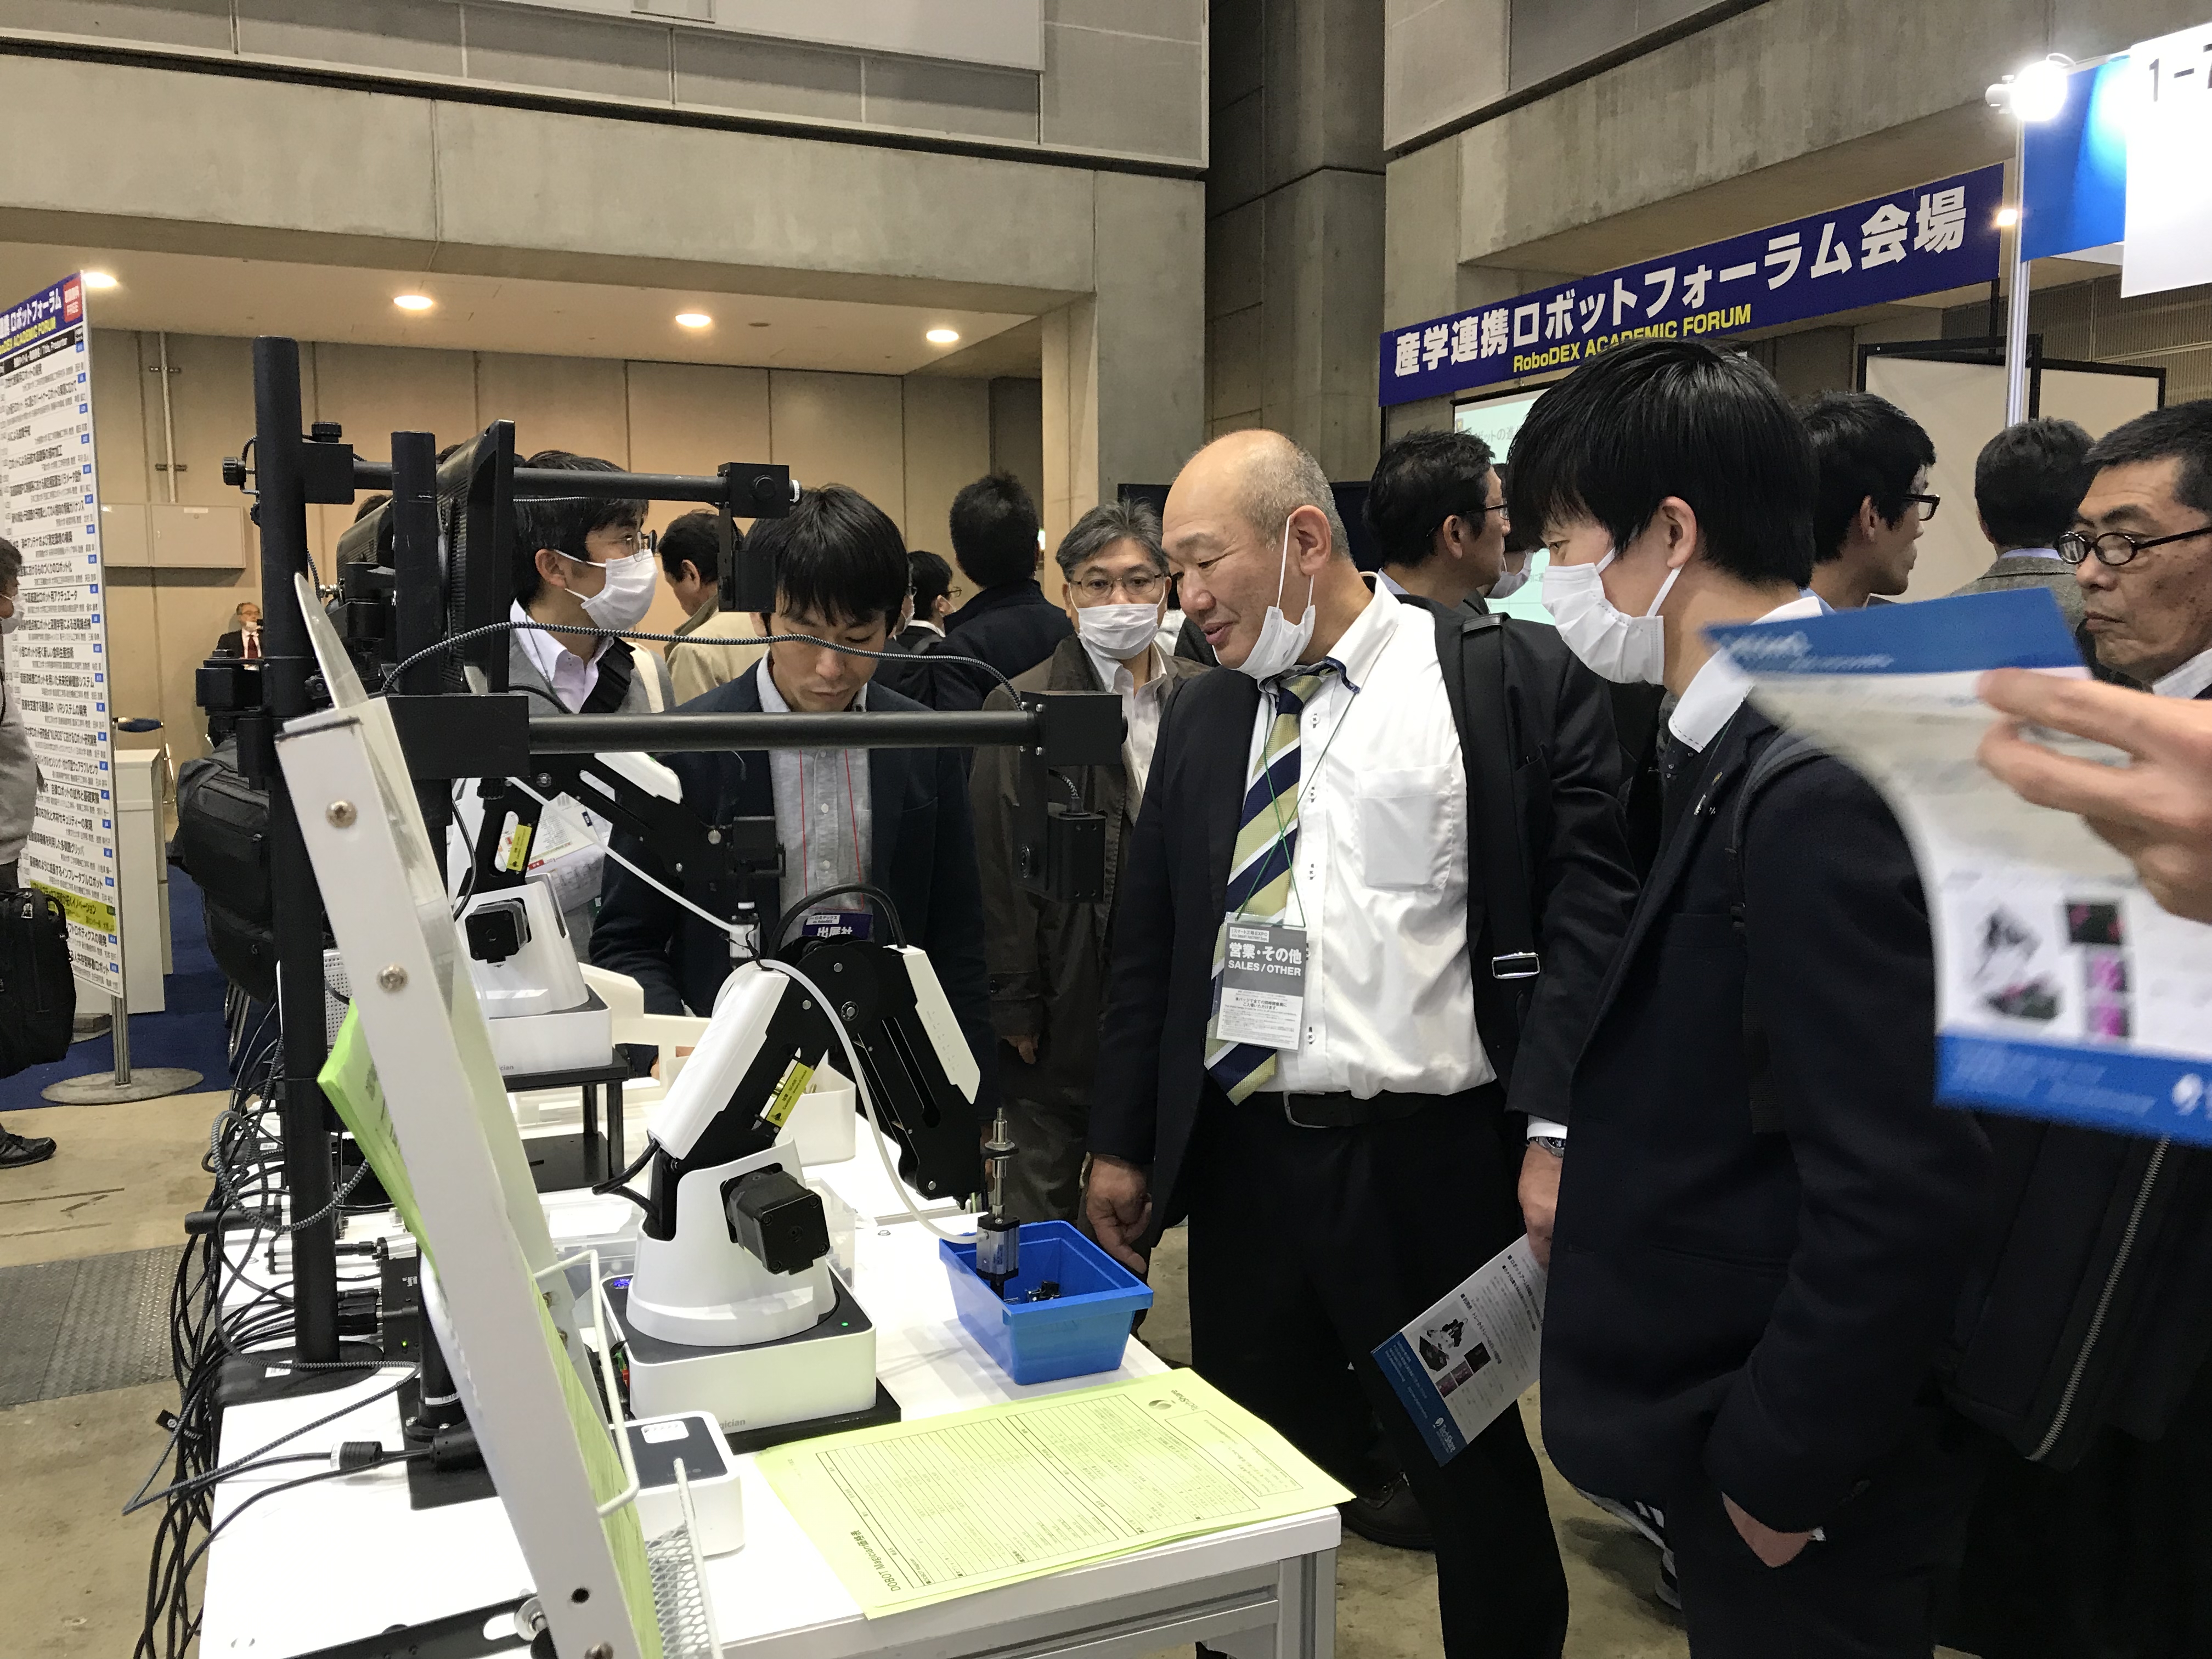 Dobot Robots Showcase Multi Talents in Automation & Beyond at RoboDEX 2020 Tokyo